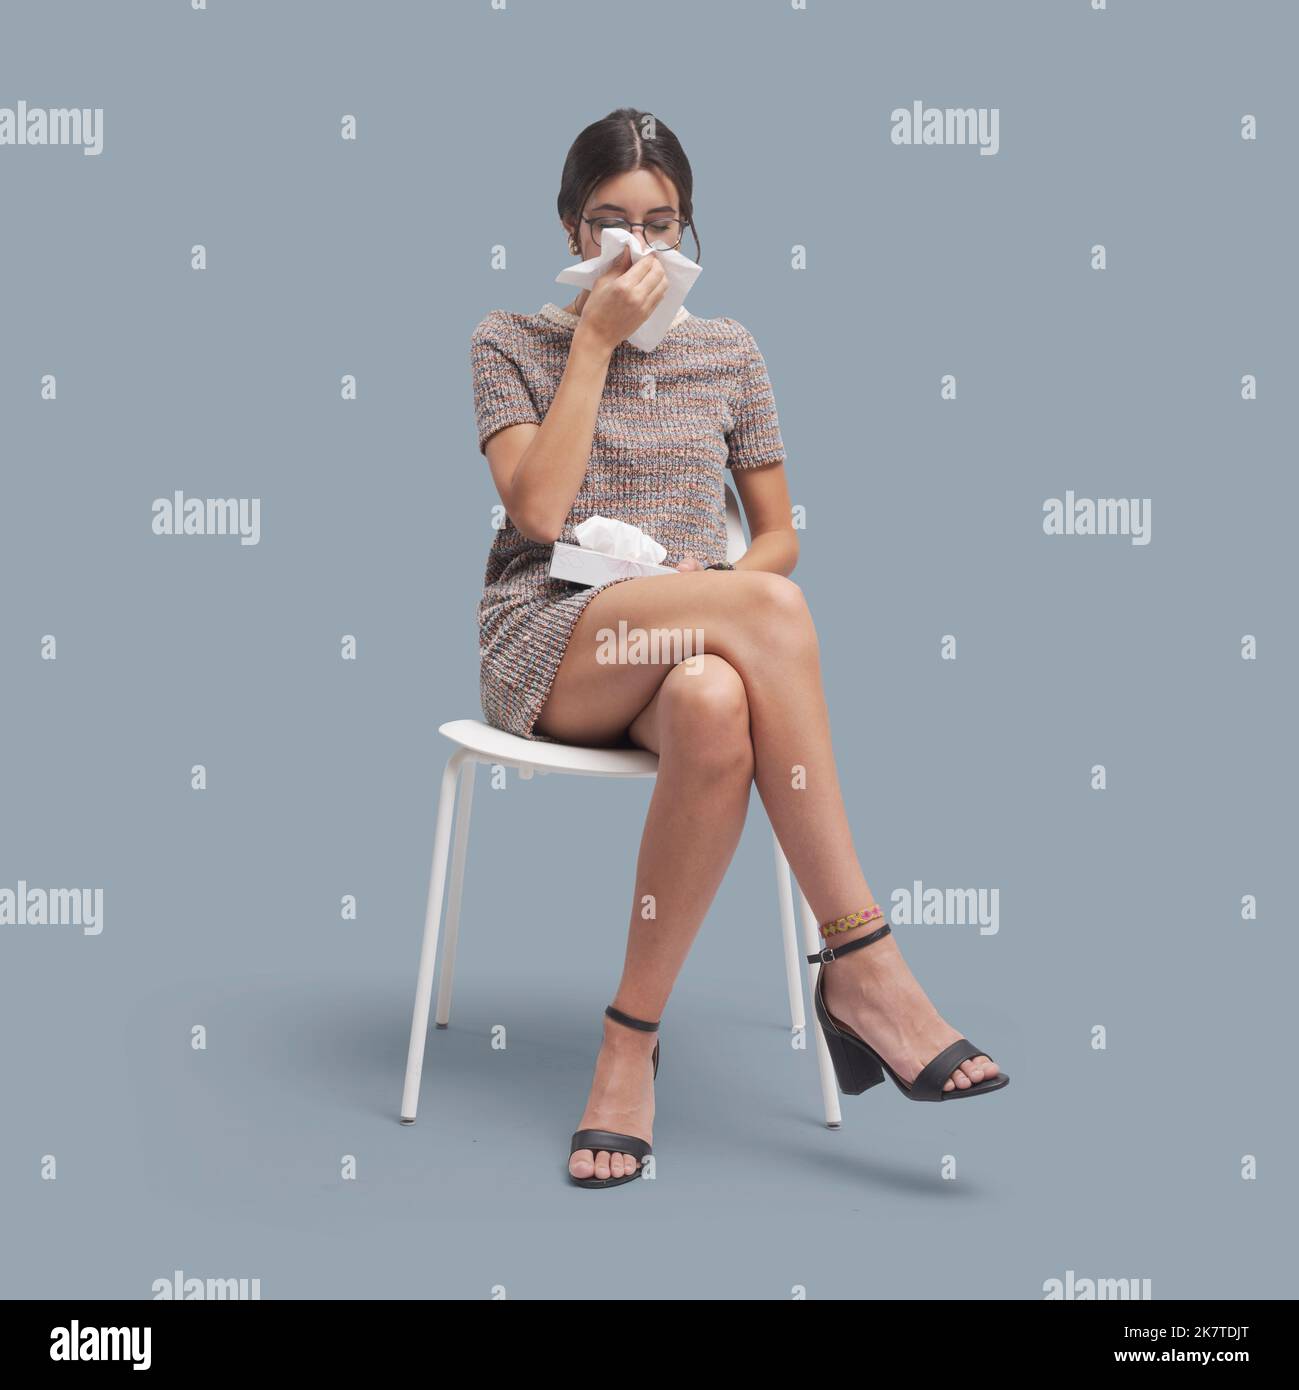 Patient sitting on a chair and waiting, she has cold and flu and she is blowing her nose, healthcare and medicine concept Stock Photo